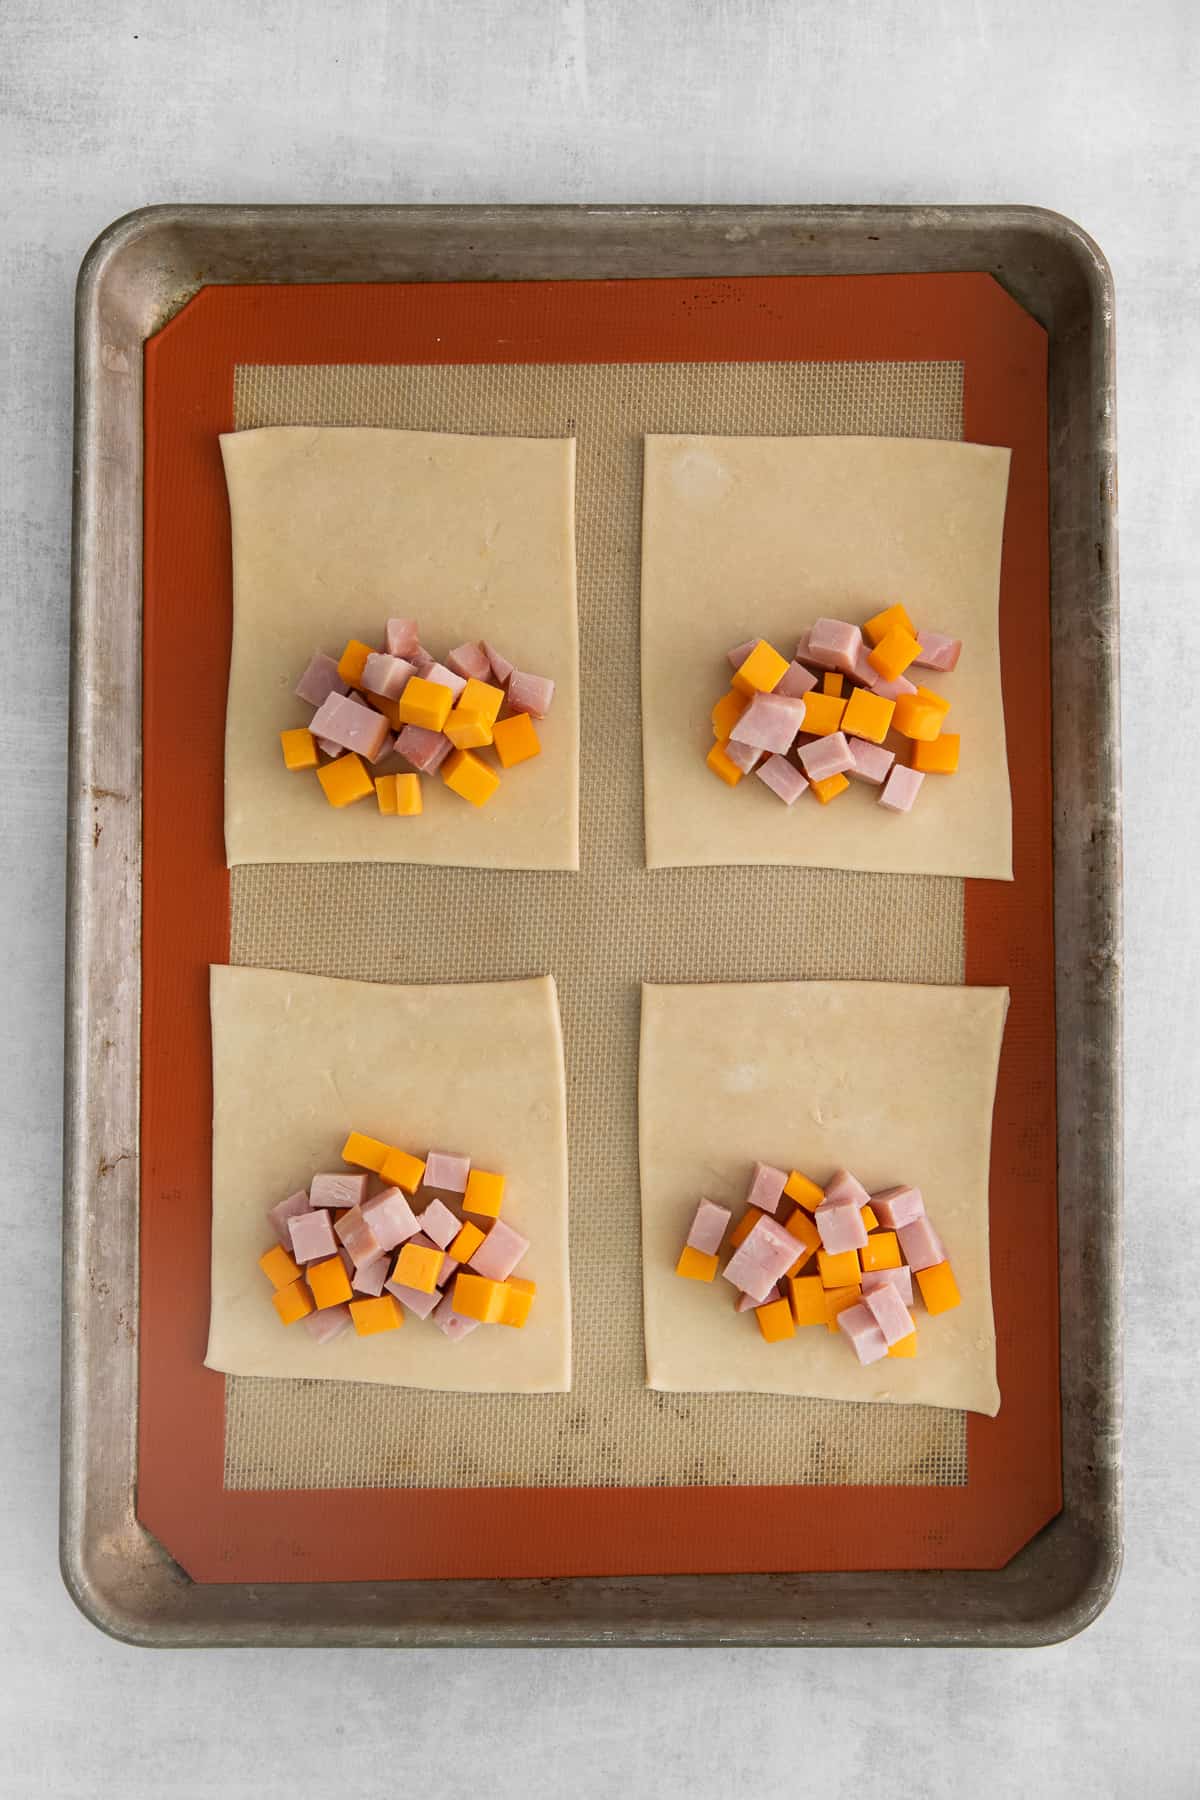 Diced ham and cheese on hand pie dough.